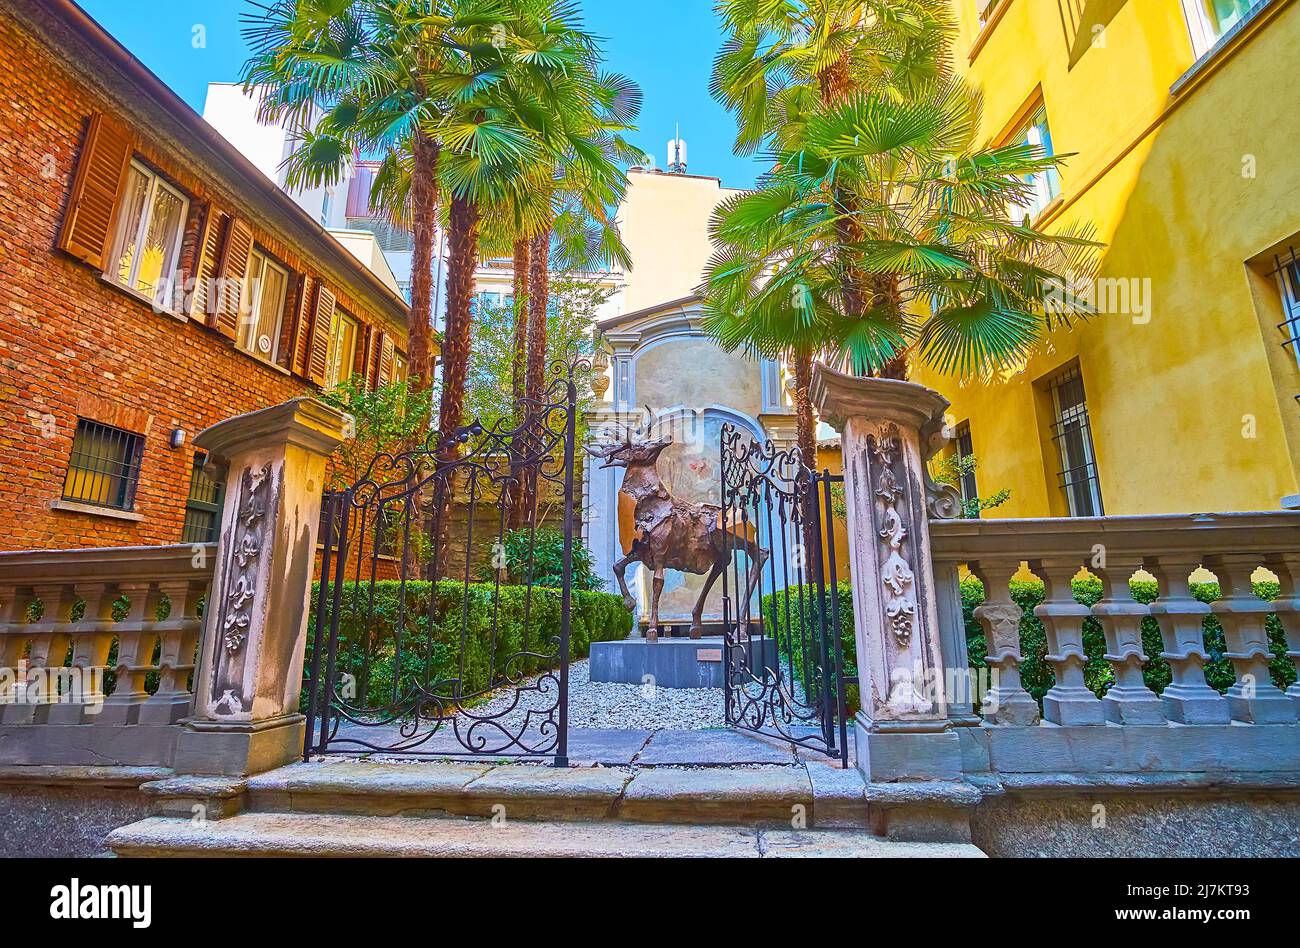 LUGANO, SWITZERLAND - MARCH 25, 2022: The courtyard of Palazzo Riva, decorated with tiny garden and sculpture of deer by Nag Arnoldi, on March 25 in L Stock Photo